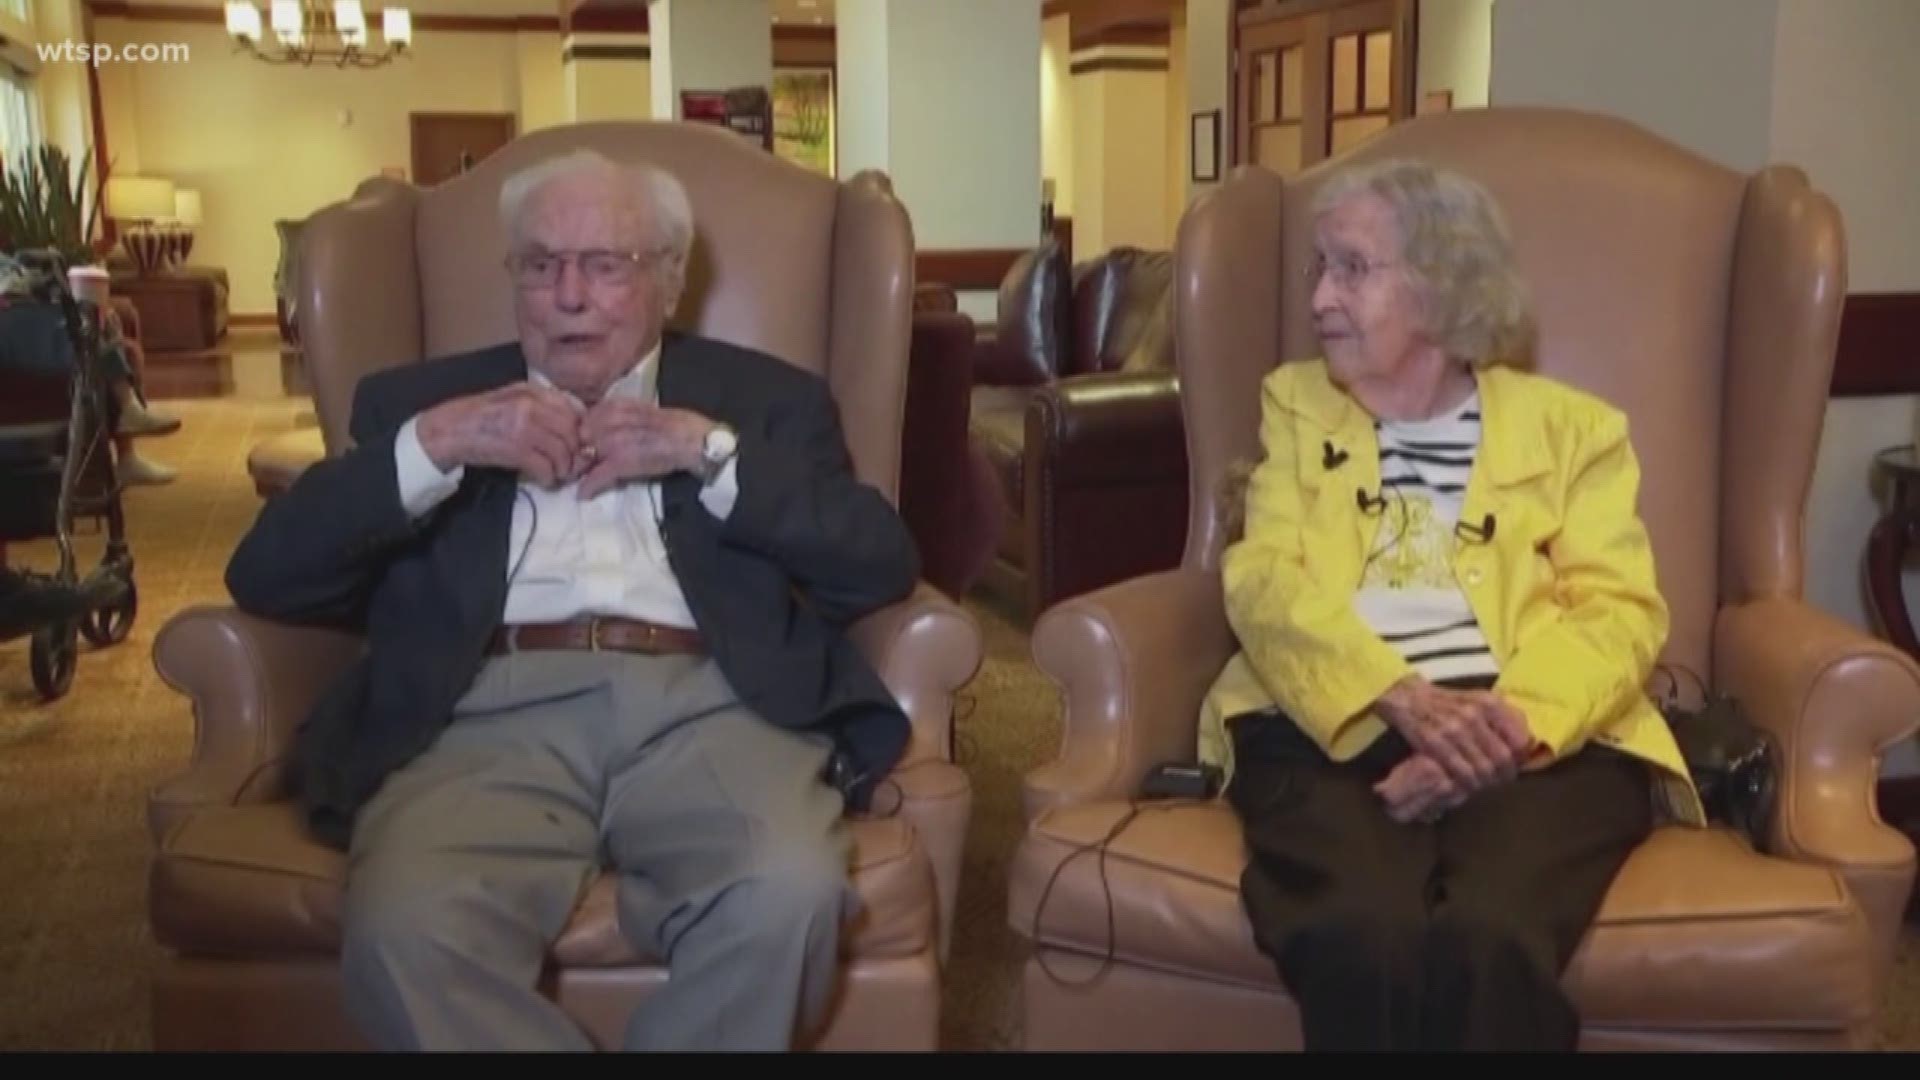 Start taking notes, this couple has been happily married for 80 years!